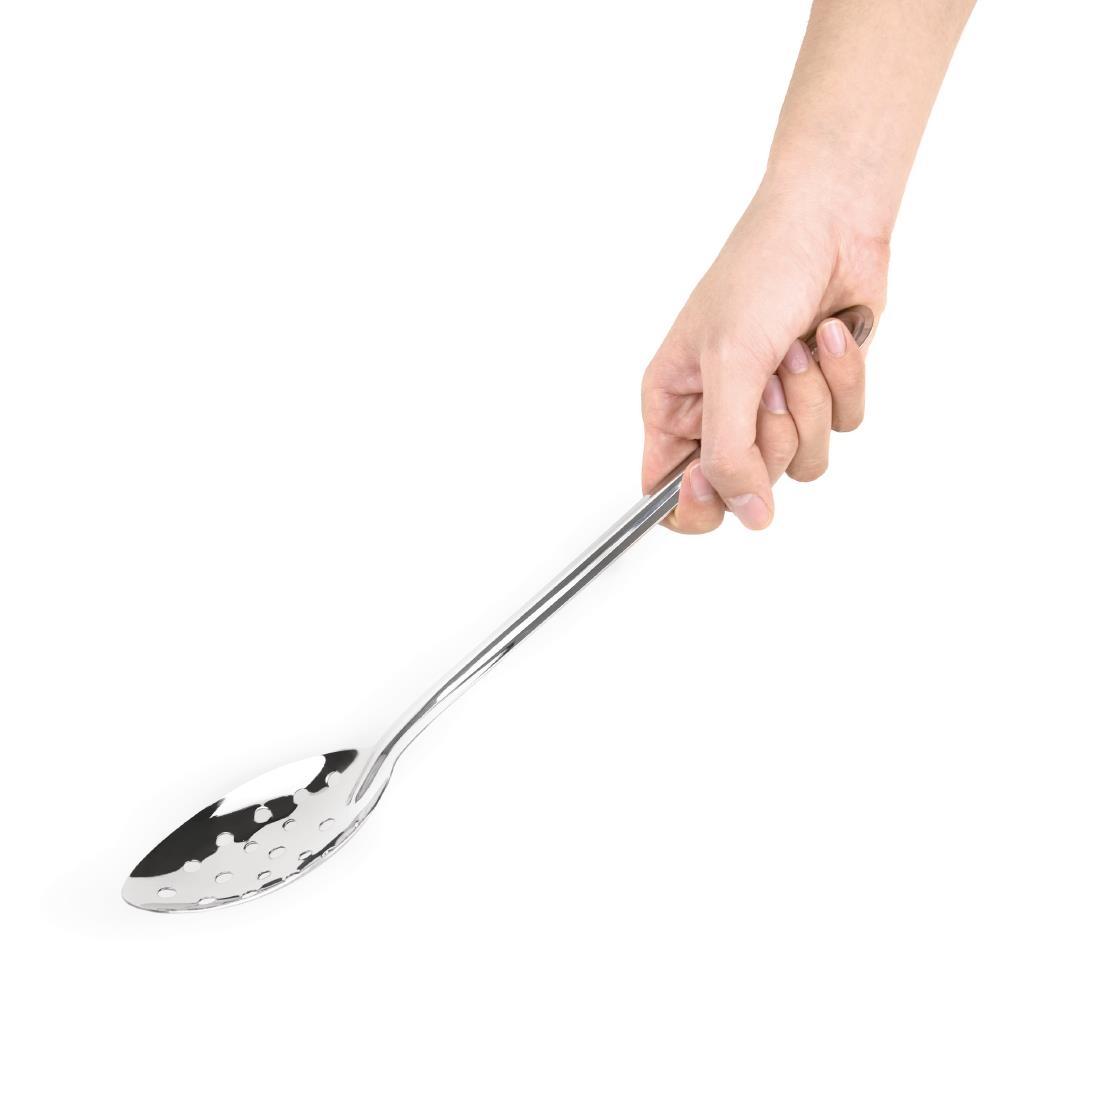 Vogue Stainless Steel Perforated Serving Spoon - J640  - 4